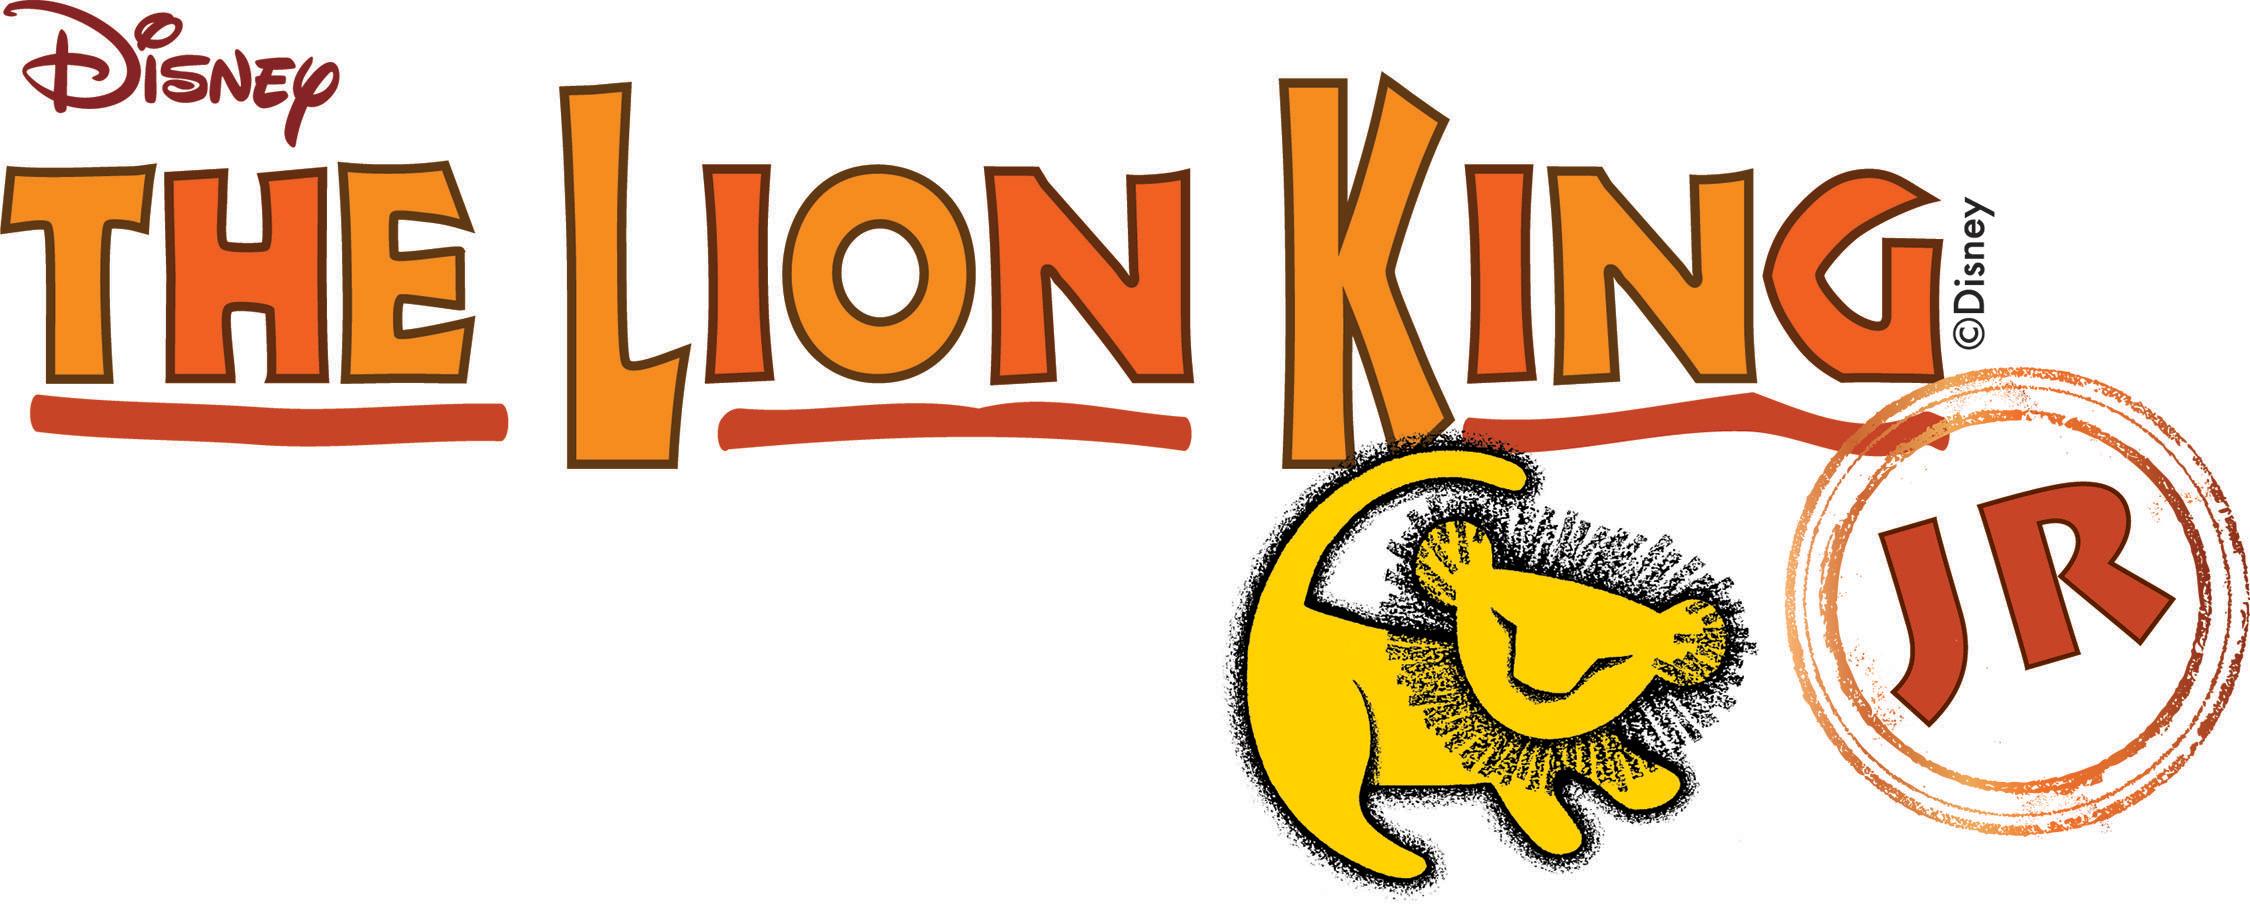 The Lion King Logo - The Lion King Jr. - Almost Heaven - West Virginia